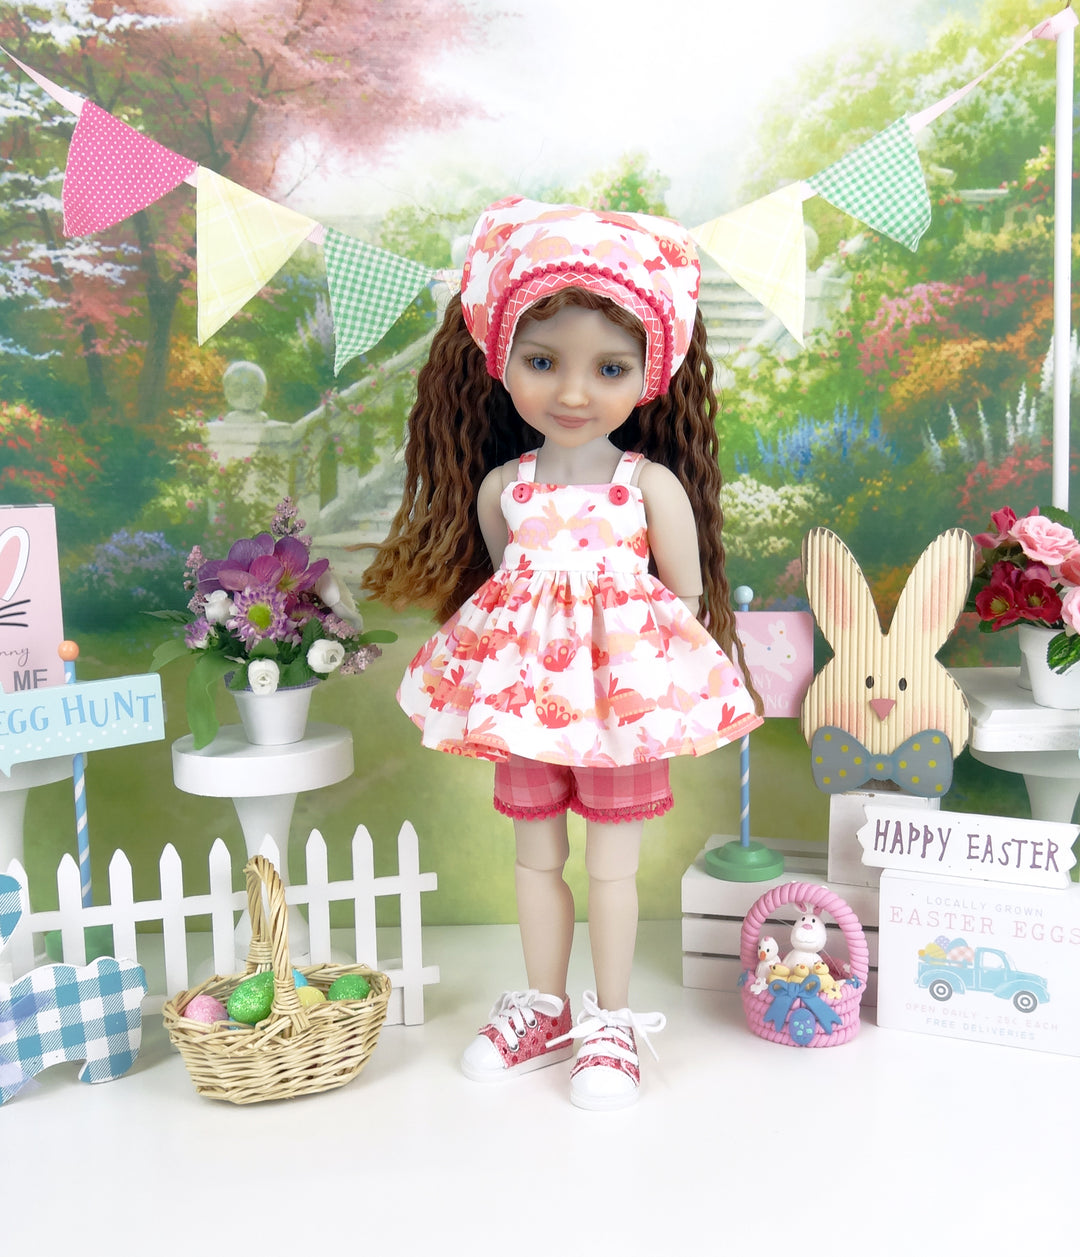 Bunny Kisses - top & shorts with shoes for Ruby Red Fashion Friends doll